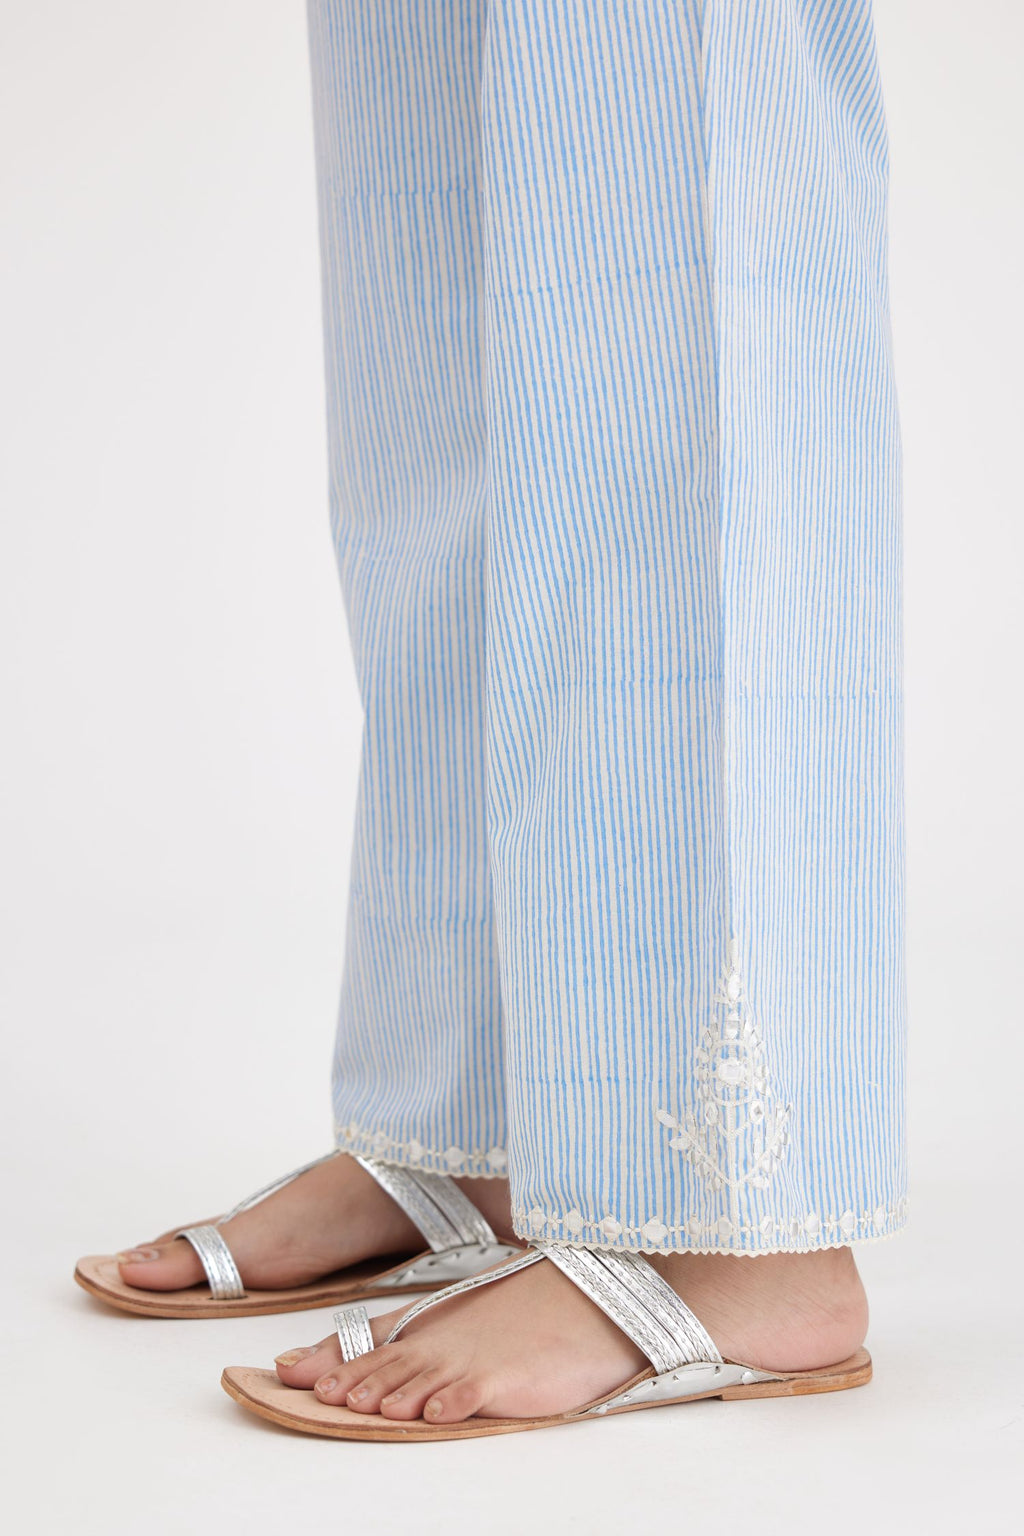 Hand-block printed striped Cotton comfortable fit pant with elasticated back and frontal drawstrings.